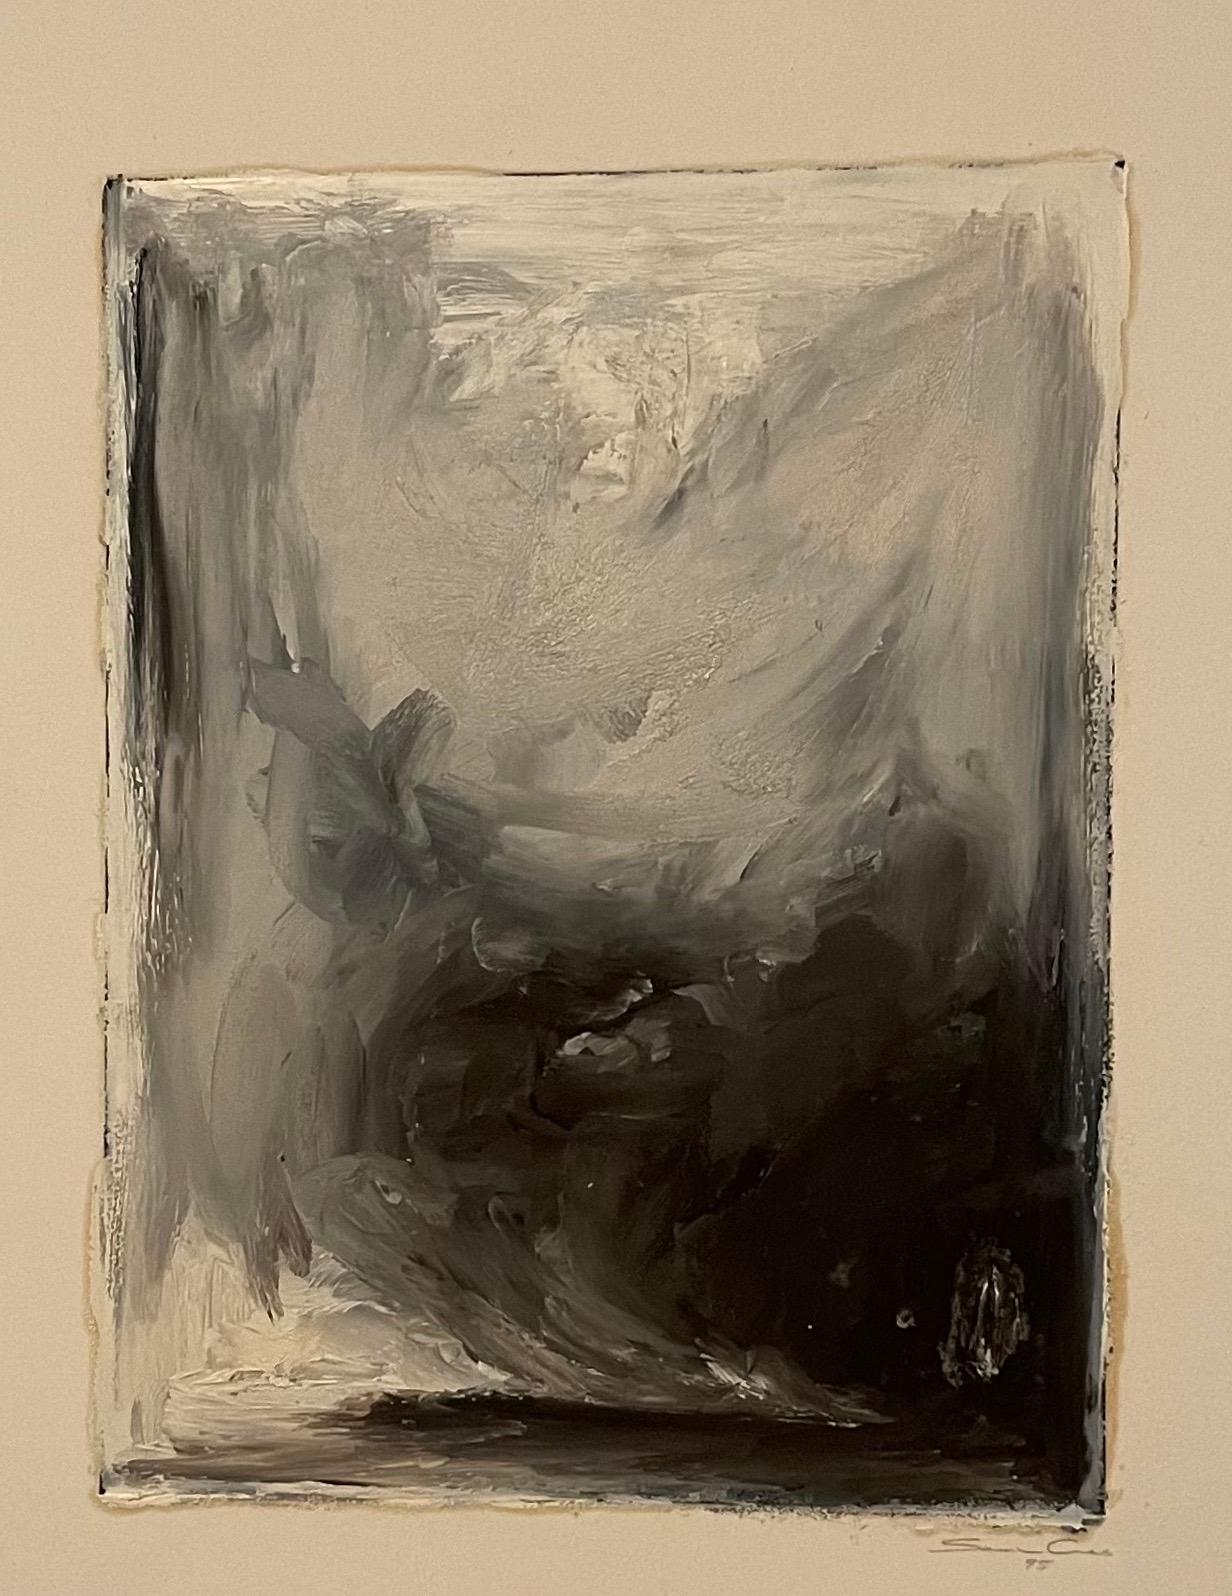 Sarah Amos(Contemporary Australian/American)
Untitled Monotype, 
1995
Monotype or painting on paper 
12 x 9 inches on a 22.25 x 15 inches sheet size, 
Hand signed and dated lower right
Provenance: Garner Tullis Workshop

This appears as a abstract